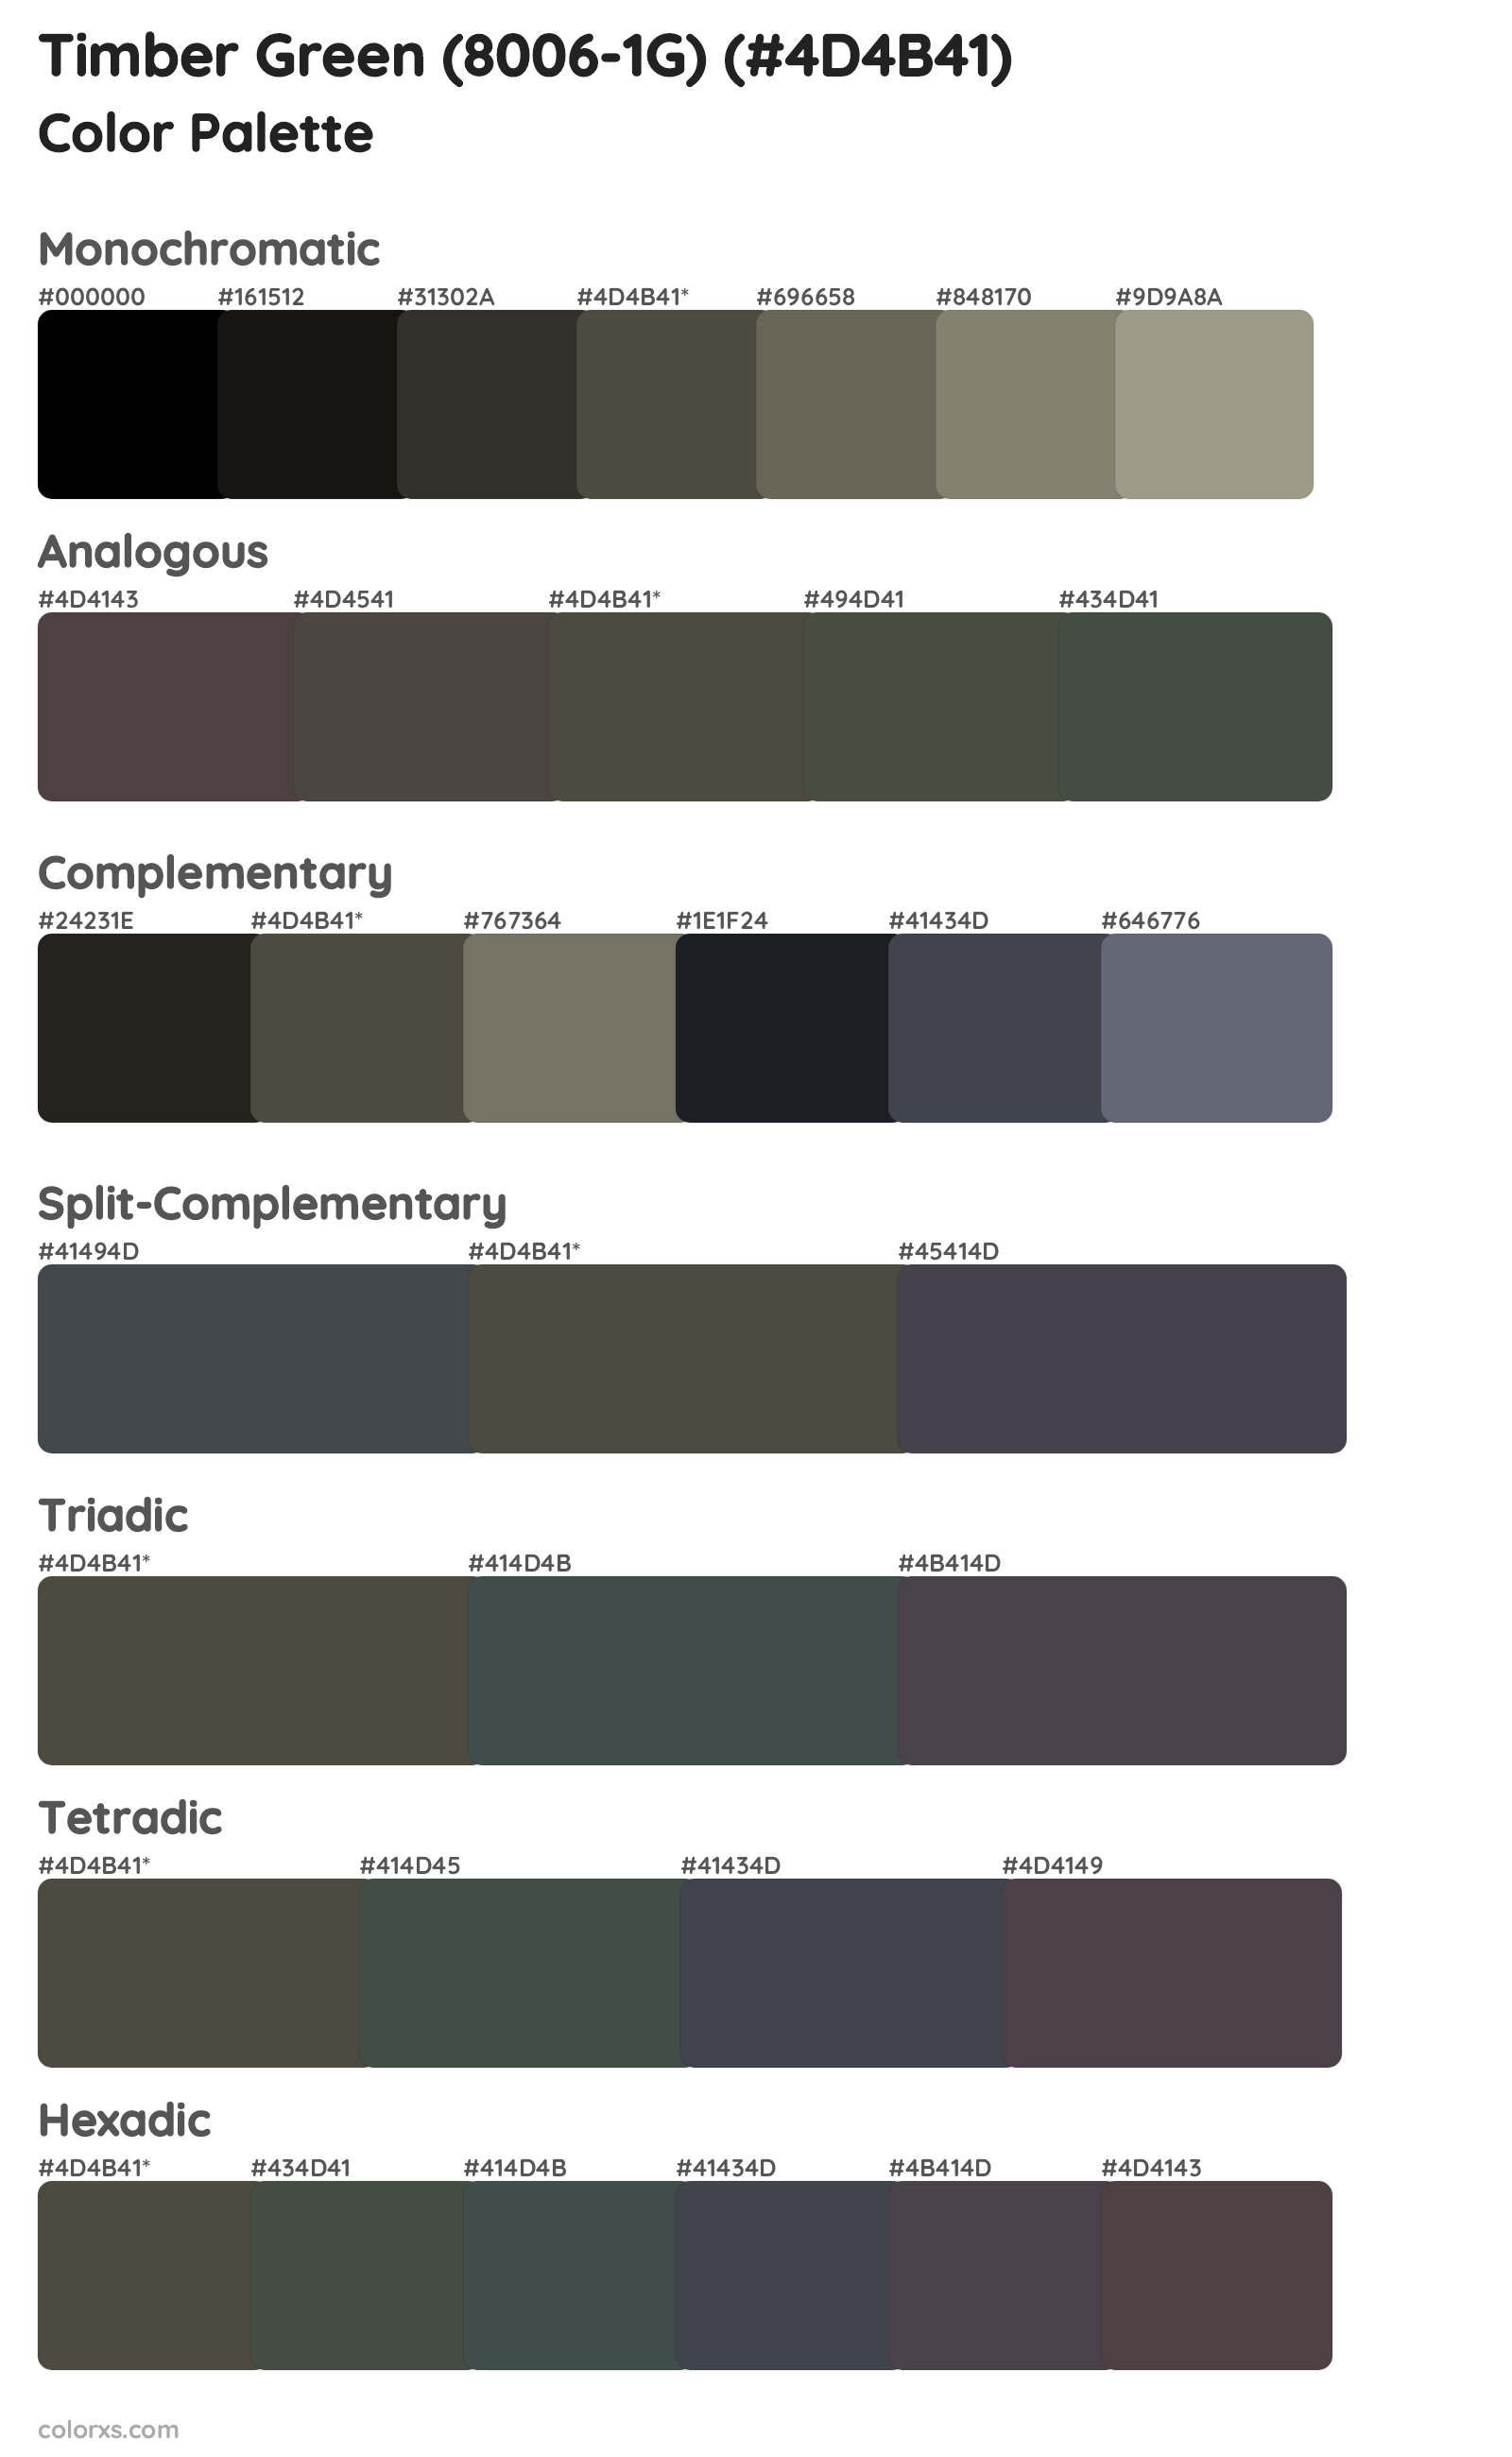 Timber Green (8006-1G) Color Scheme Palettes